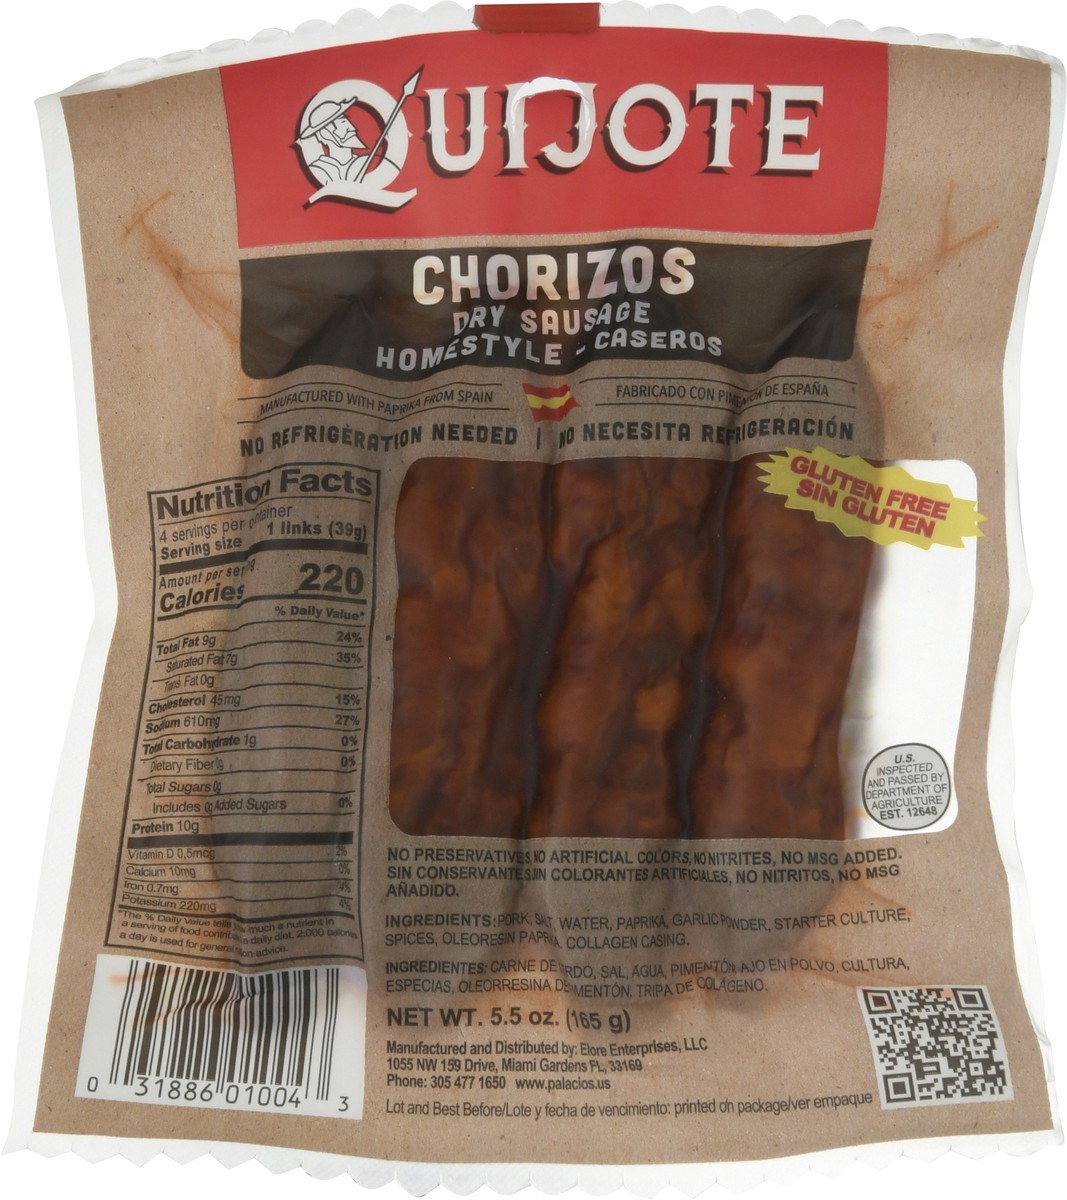 slide 2 of 12, Quijote Chorizos Caseros (Homestyle Dried Sausage) 4-Pack, 5.5 oz